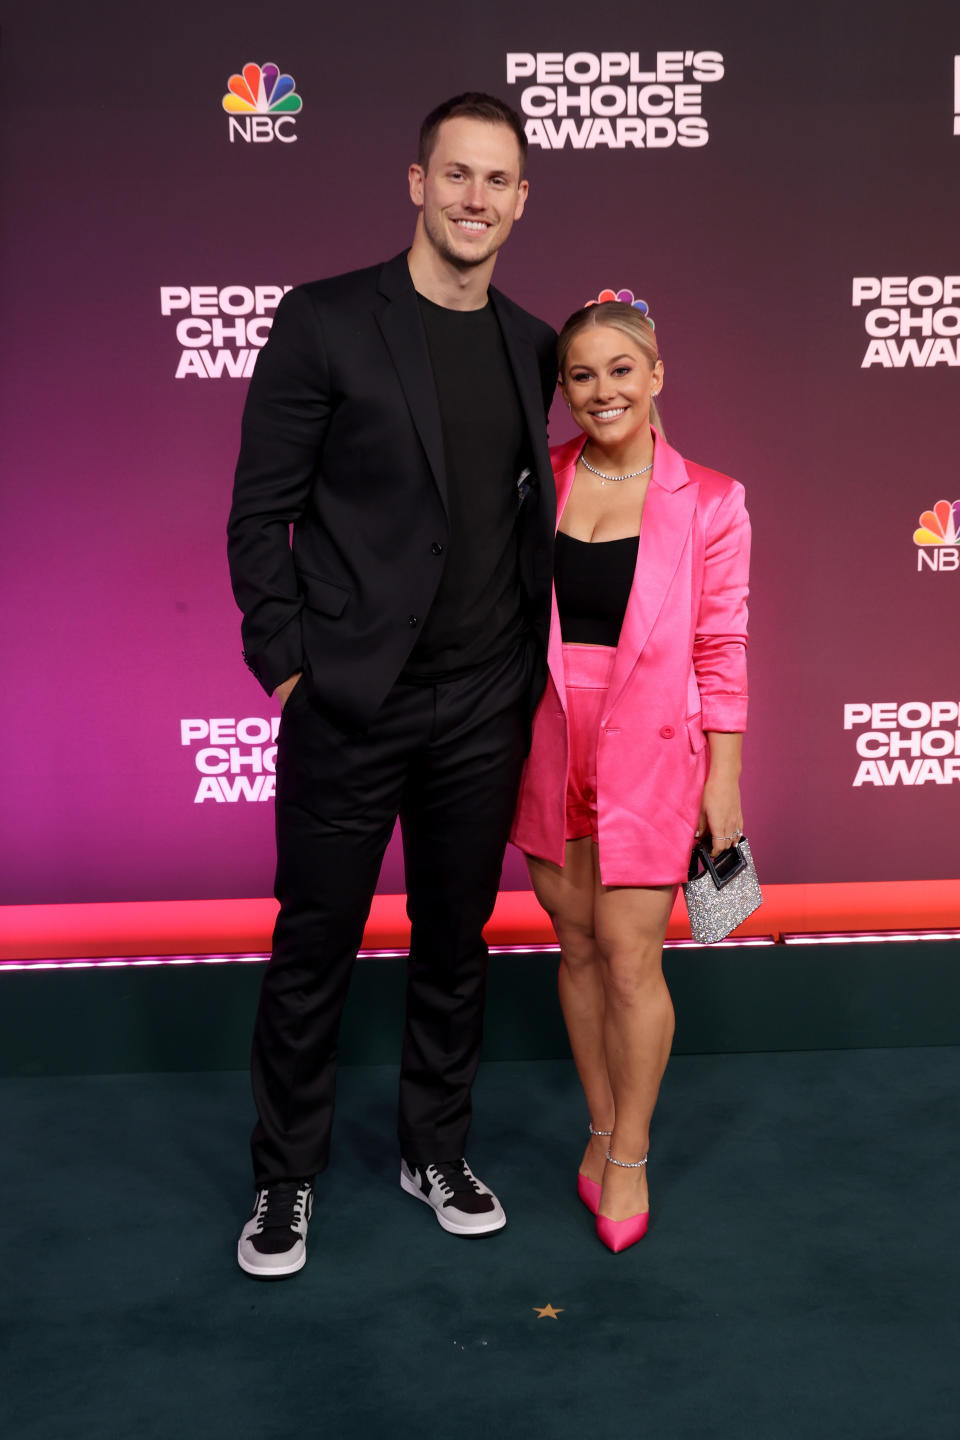 SANTA MONICA, CALIFORNIA - DECEMBER 07: 2021 PEOPLE'S CHOICE AWARDS -- Pictured: (l-r) Andrew East and Shawn Johnson East arrive to the 2021 People's Choice Awards held at Barker Hangar on December 7, 2021 in Santa Monica, California. (Photo by Rich Polk/E! Entertainment/NBCUniversal/NBCU Photo Bank via Getty Images)